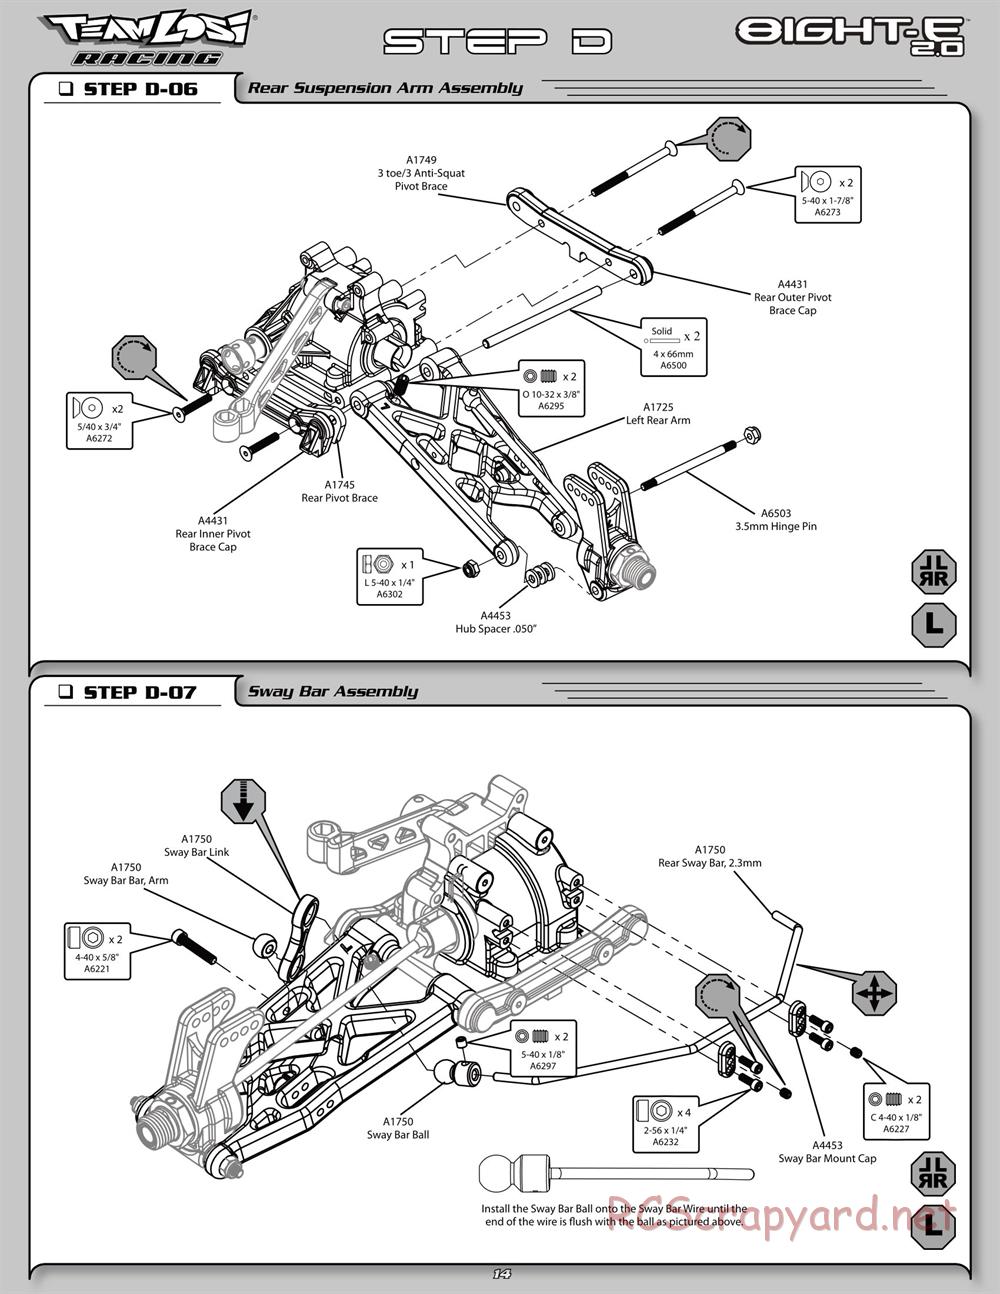 Team Losi - 8ight-E 2.0 Race Roller - Manual - Page 21